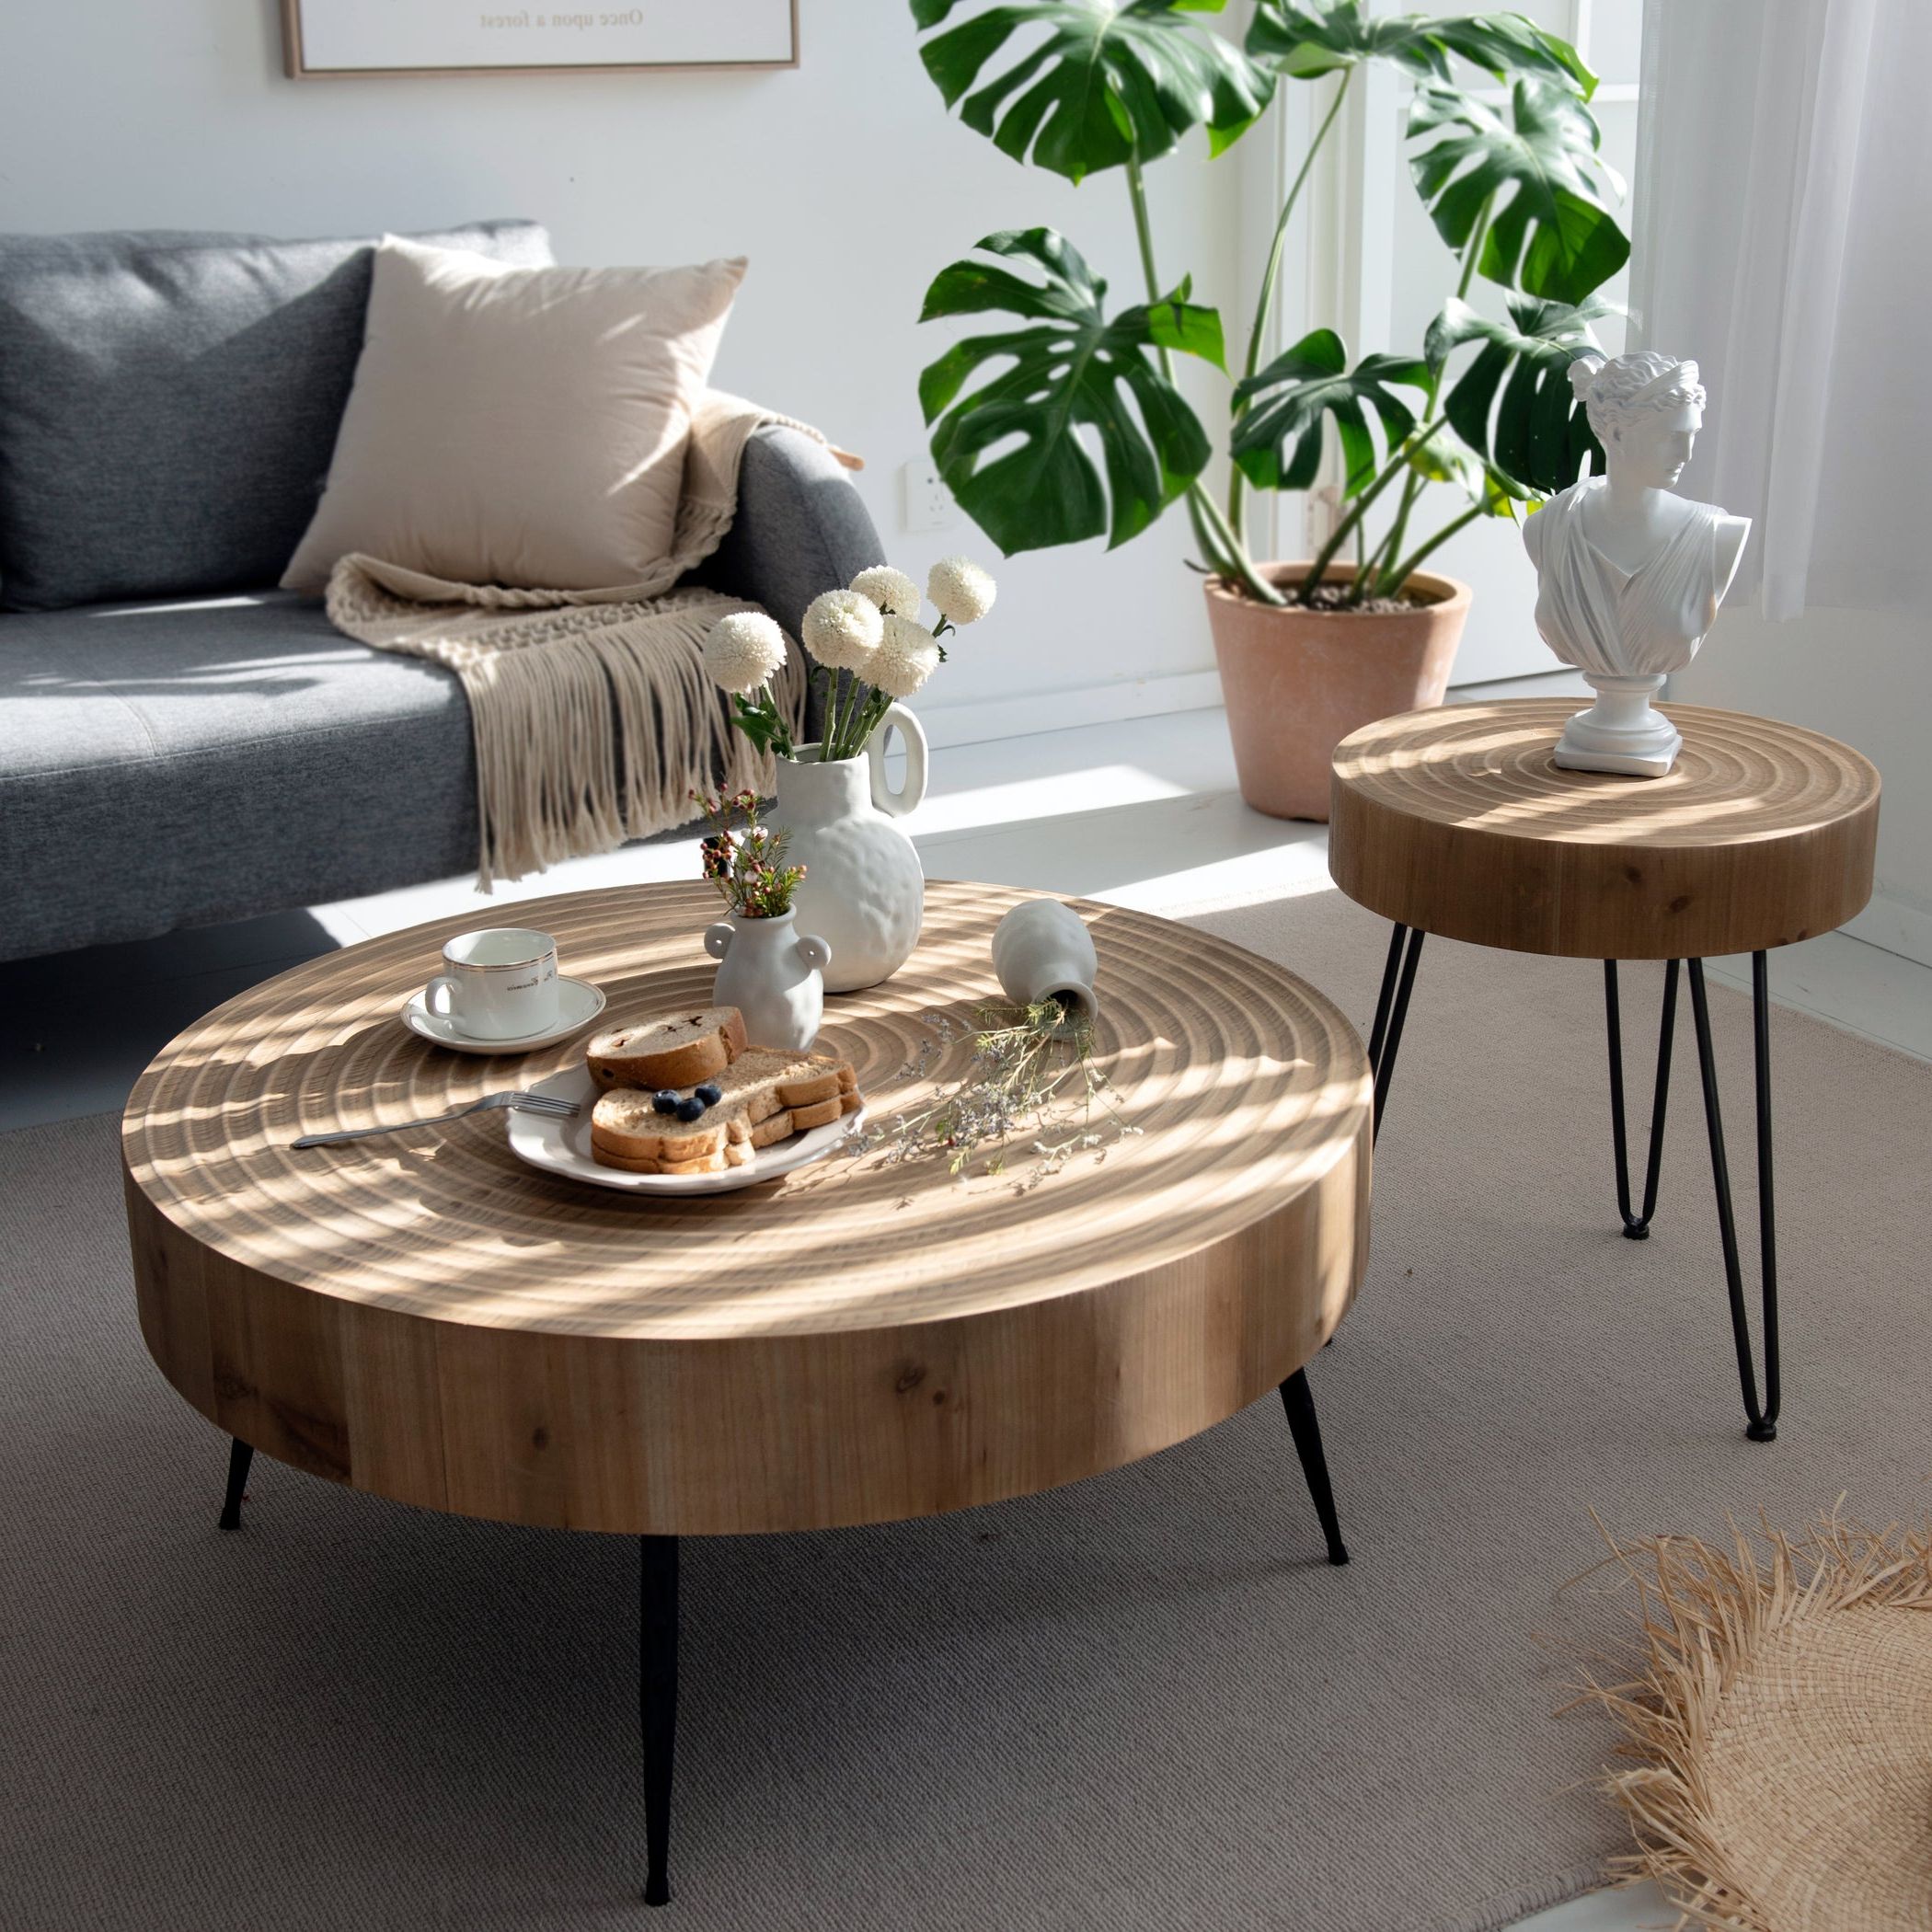 Cozayh 2 Piece Modern Farmhouse Living Room Coffee Table Set, Round Intended For Living Room Farmhouse Coffee Tables (View 10 of 20)